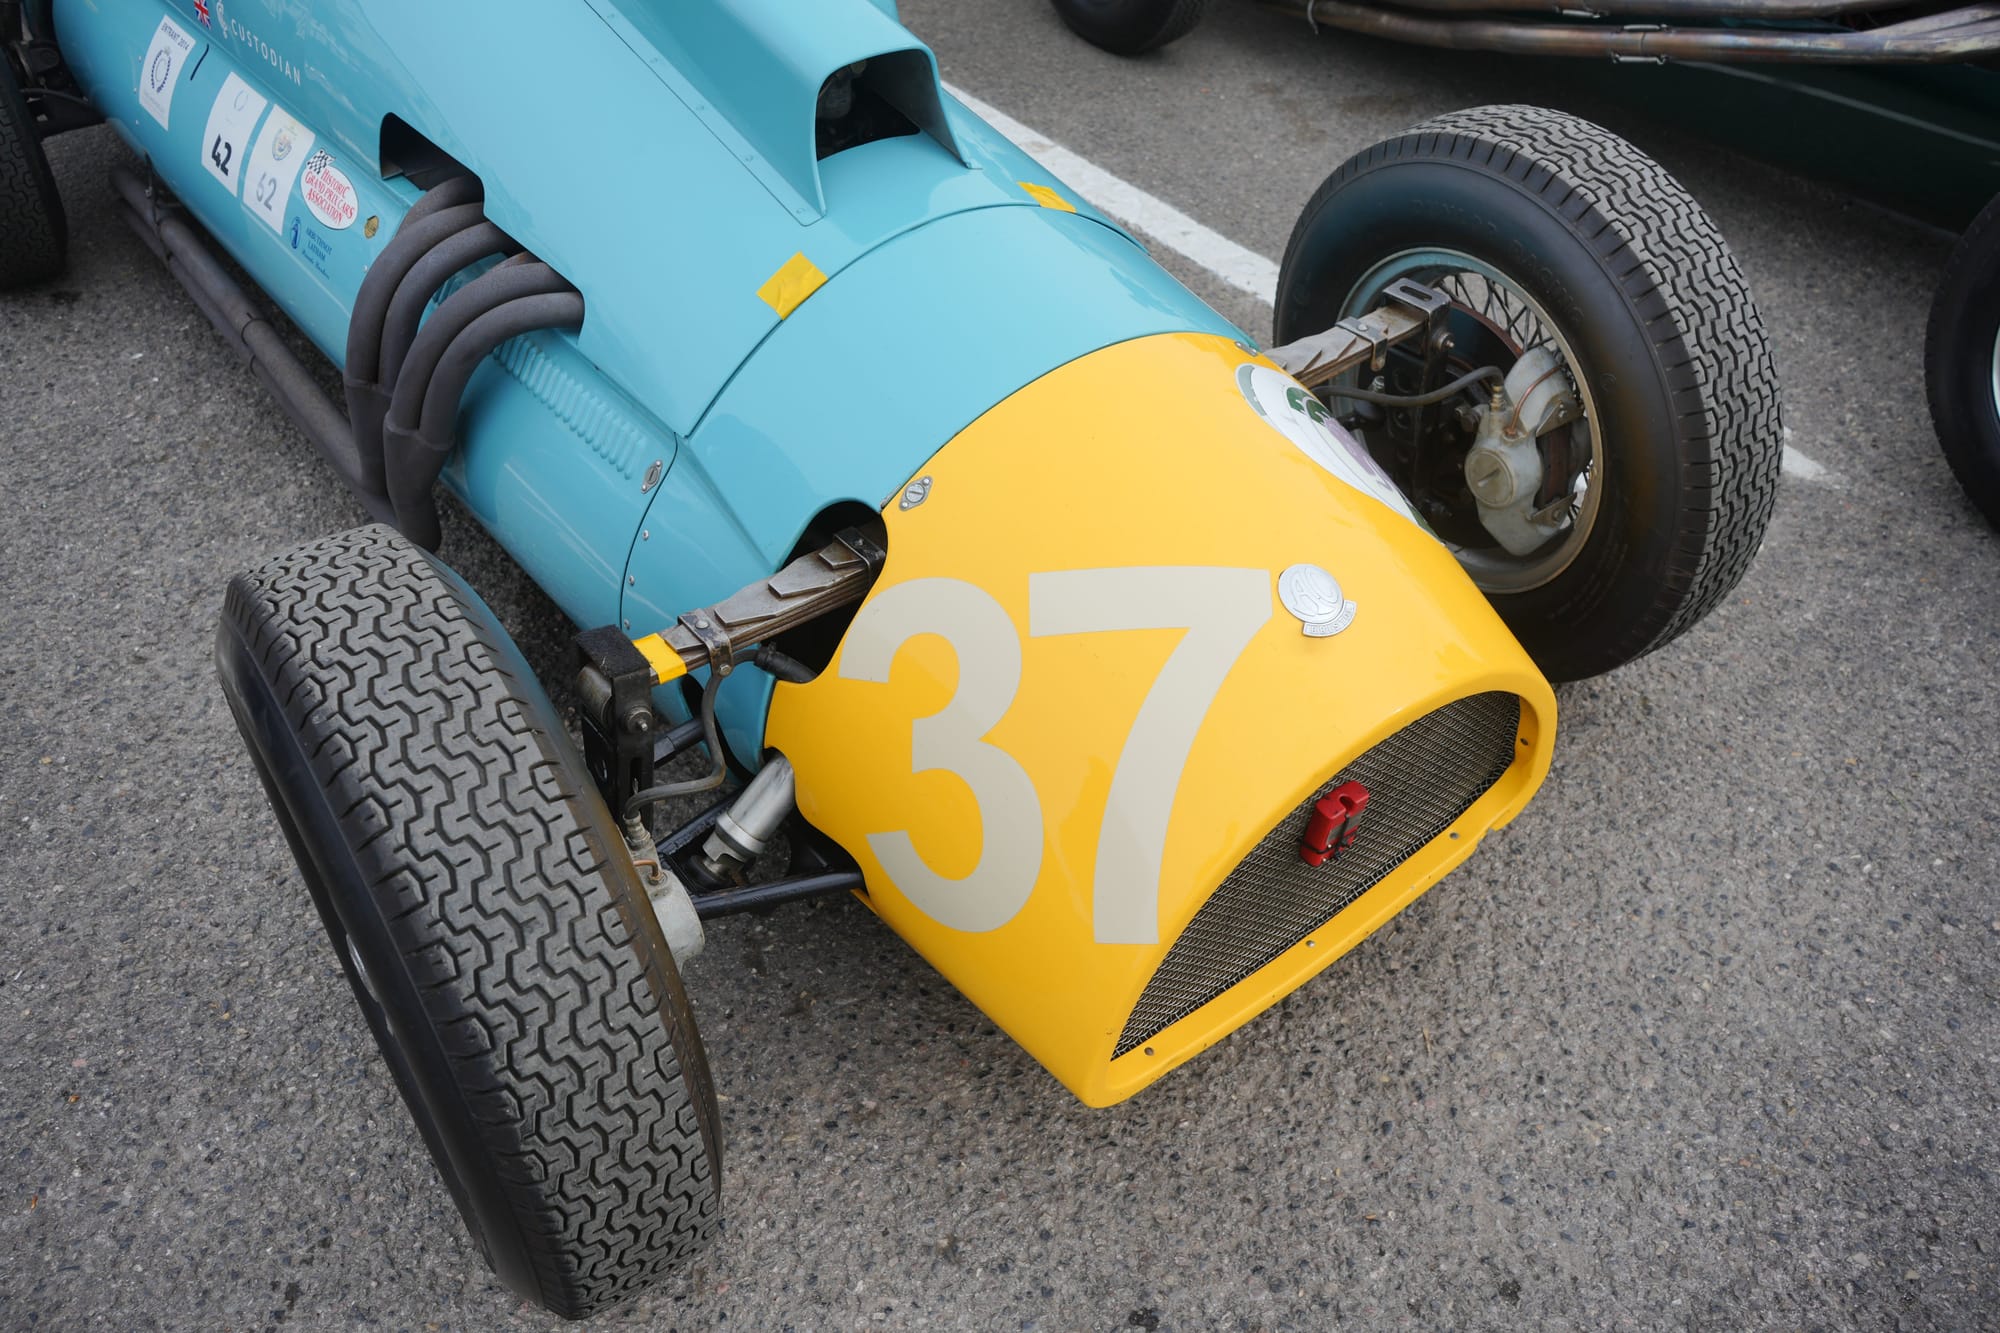 Screaming V12s and Can-Am Thunder: Goodwood's 81st Members' Meeting